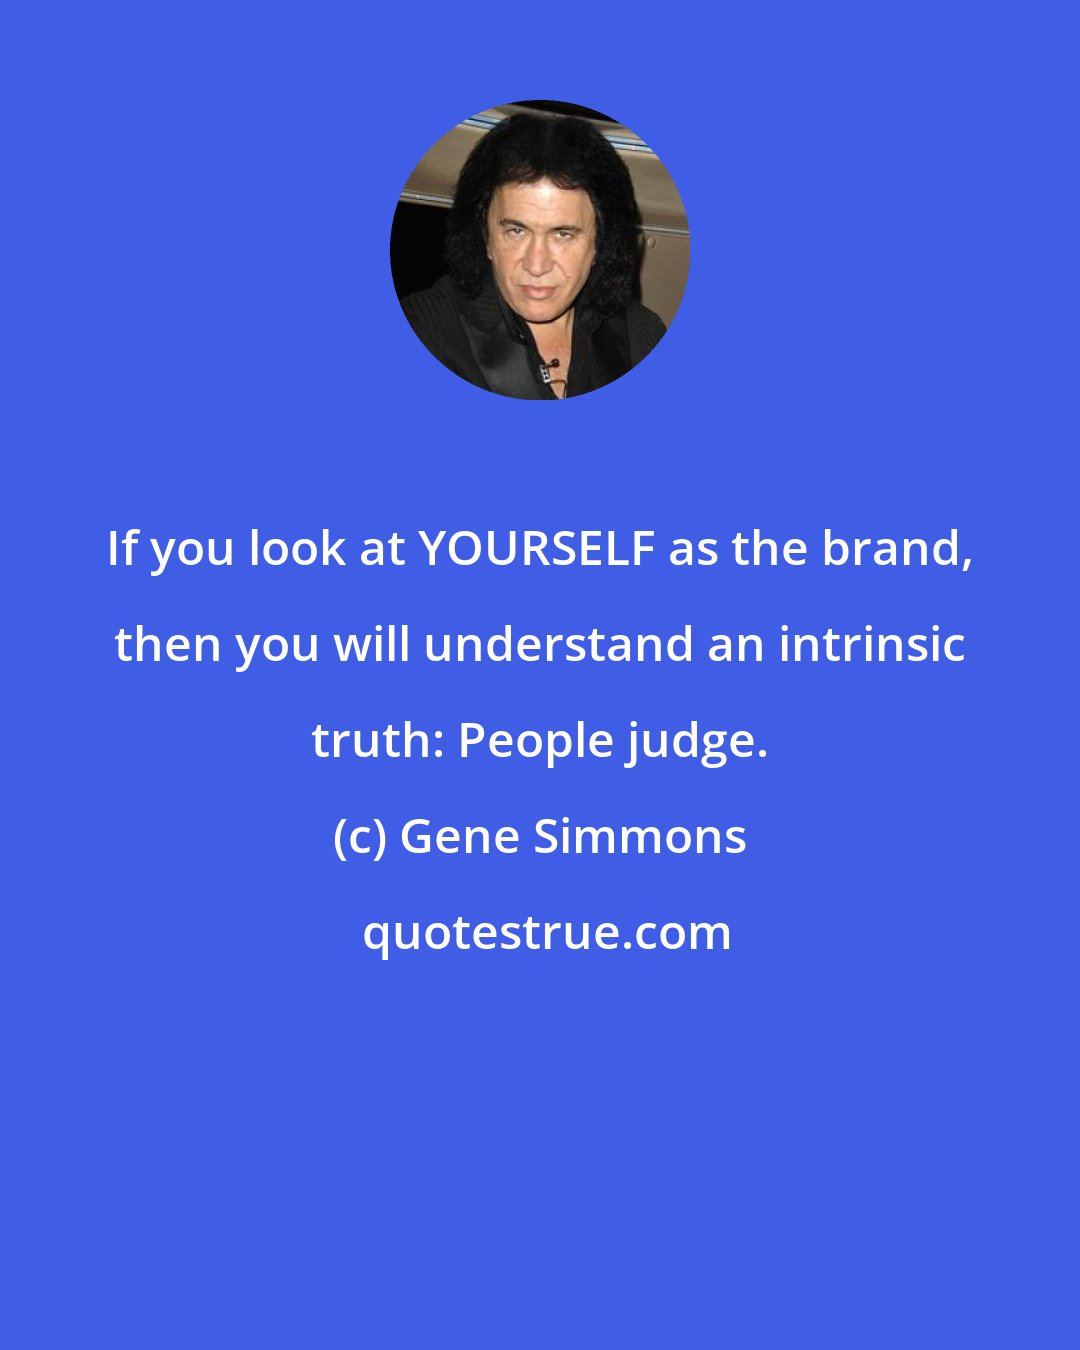 Gene Simmons: If you look at YOURSELF as the brand, then you will understand an intrinsic truth: People judge.